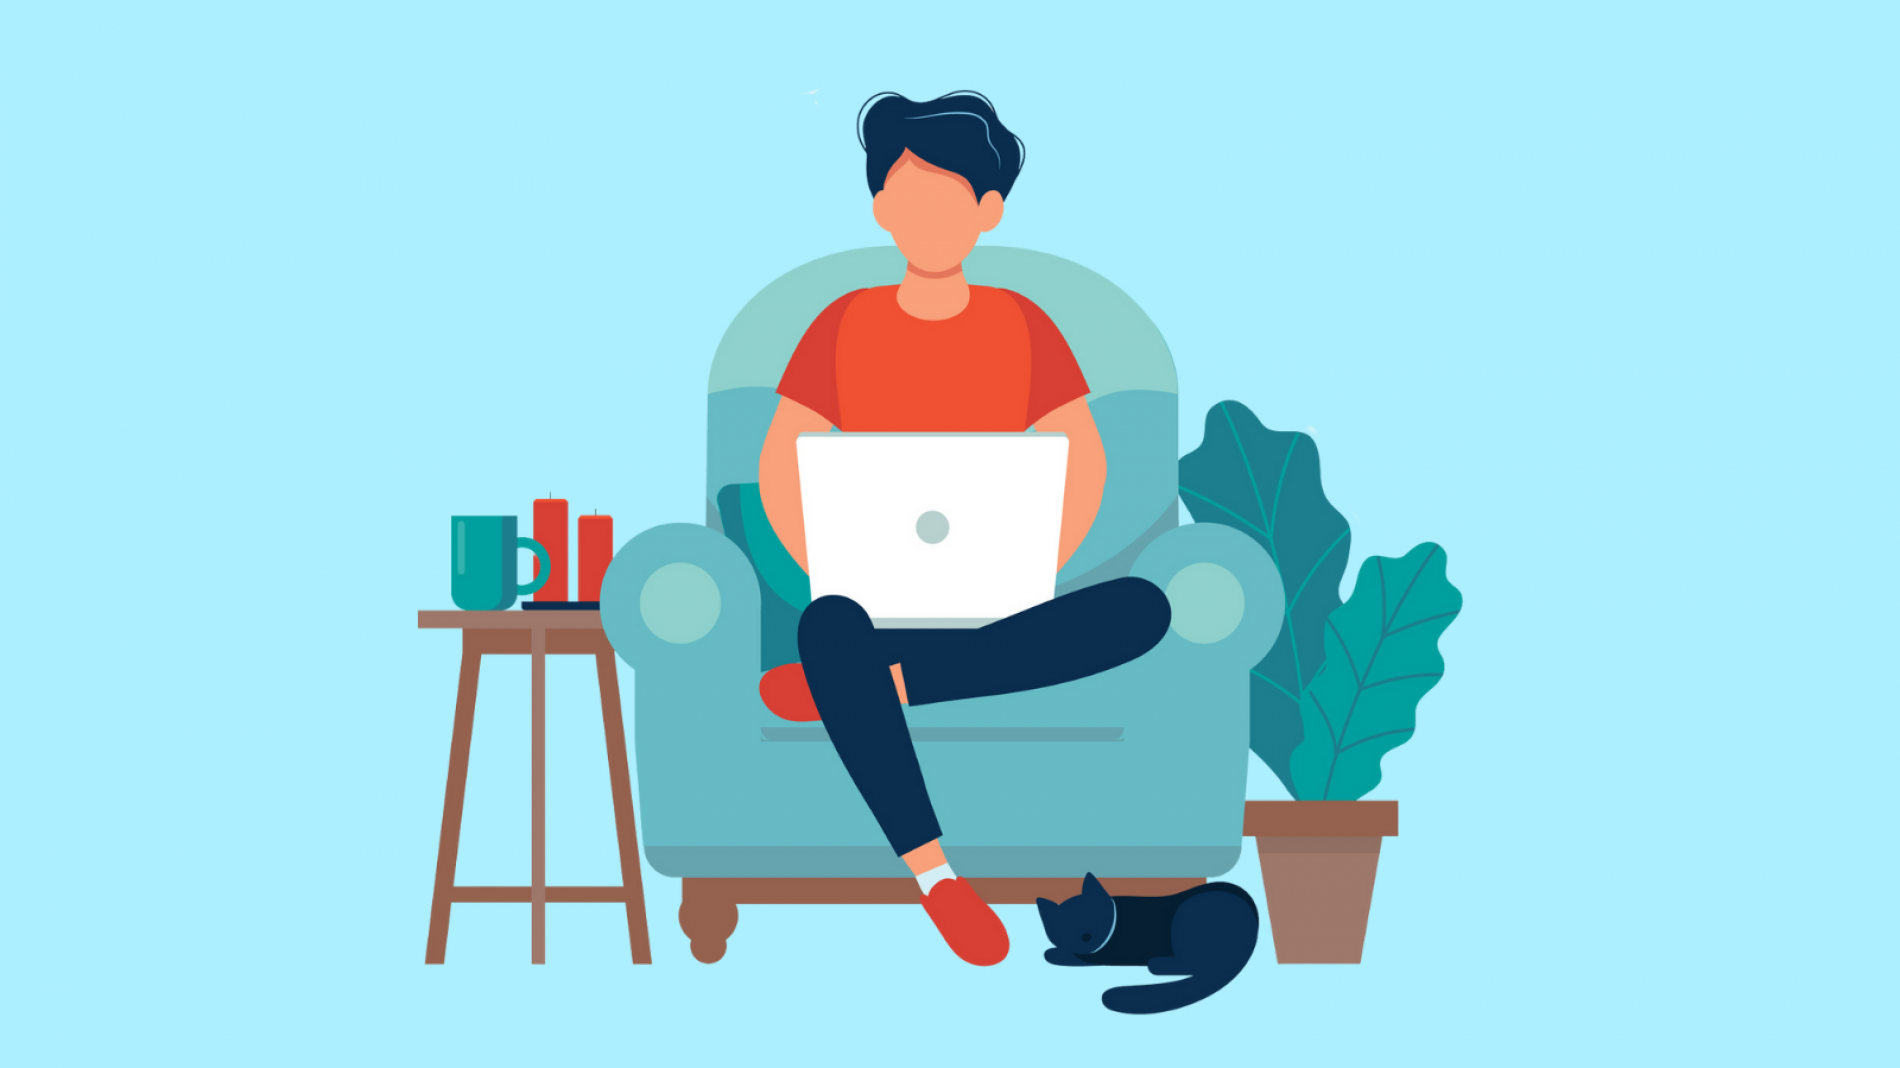 Illustration of a person sitting on a couch with a laptop on their knee